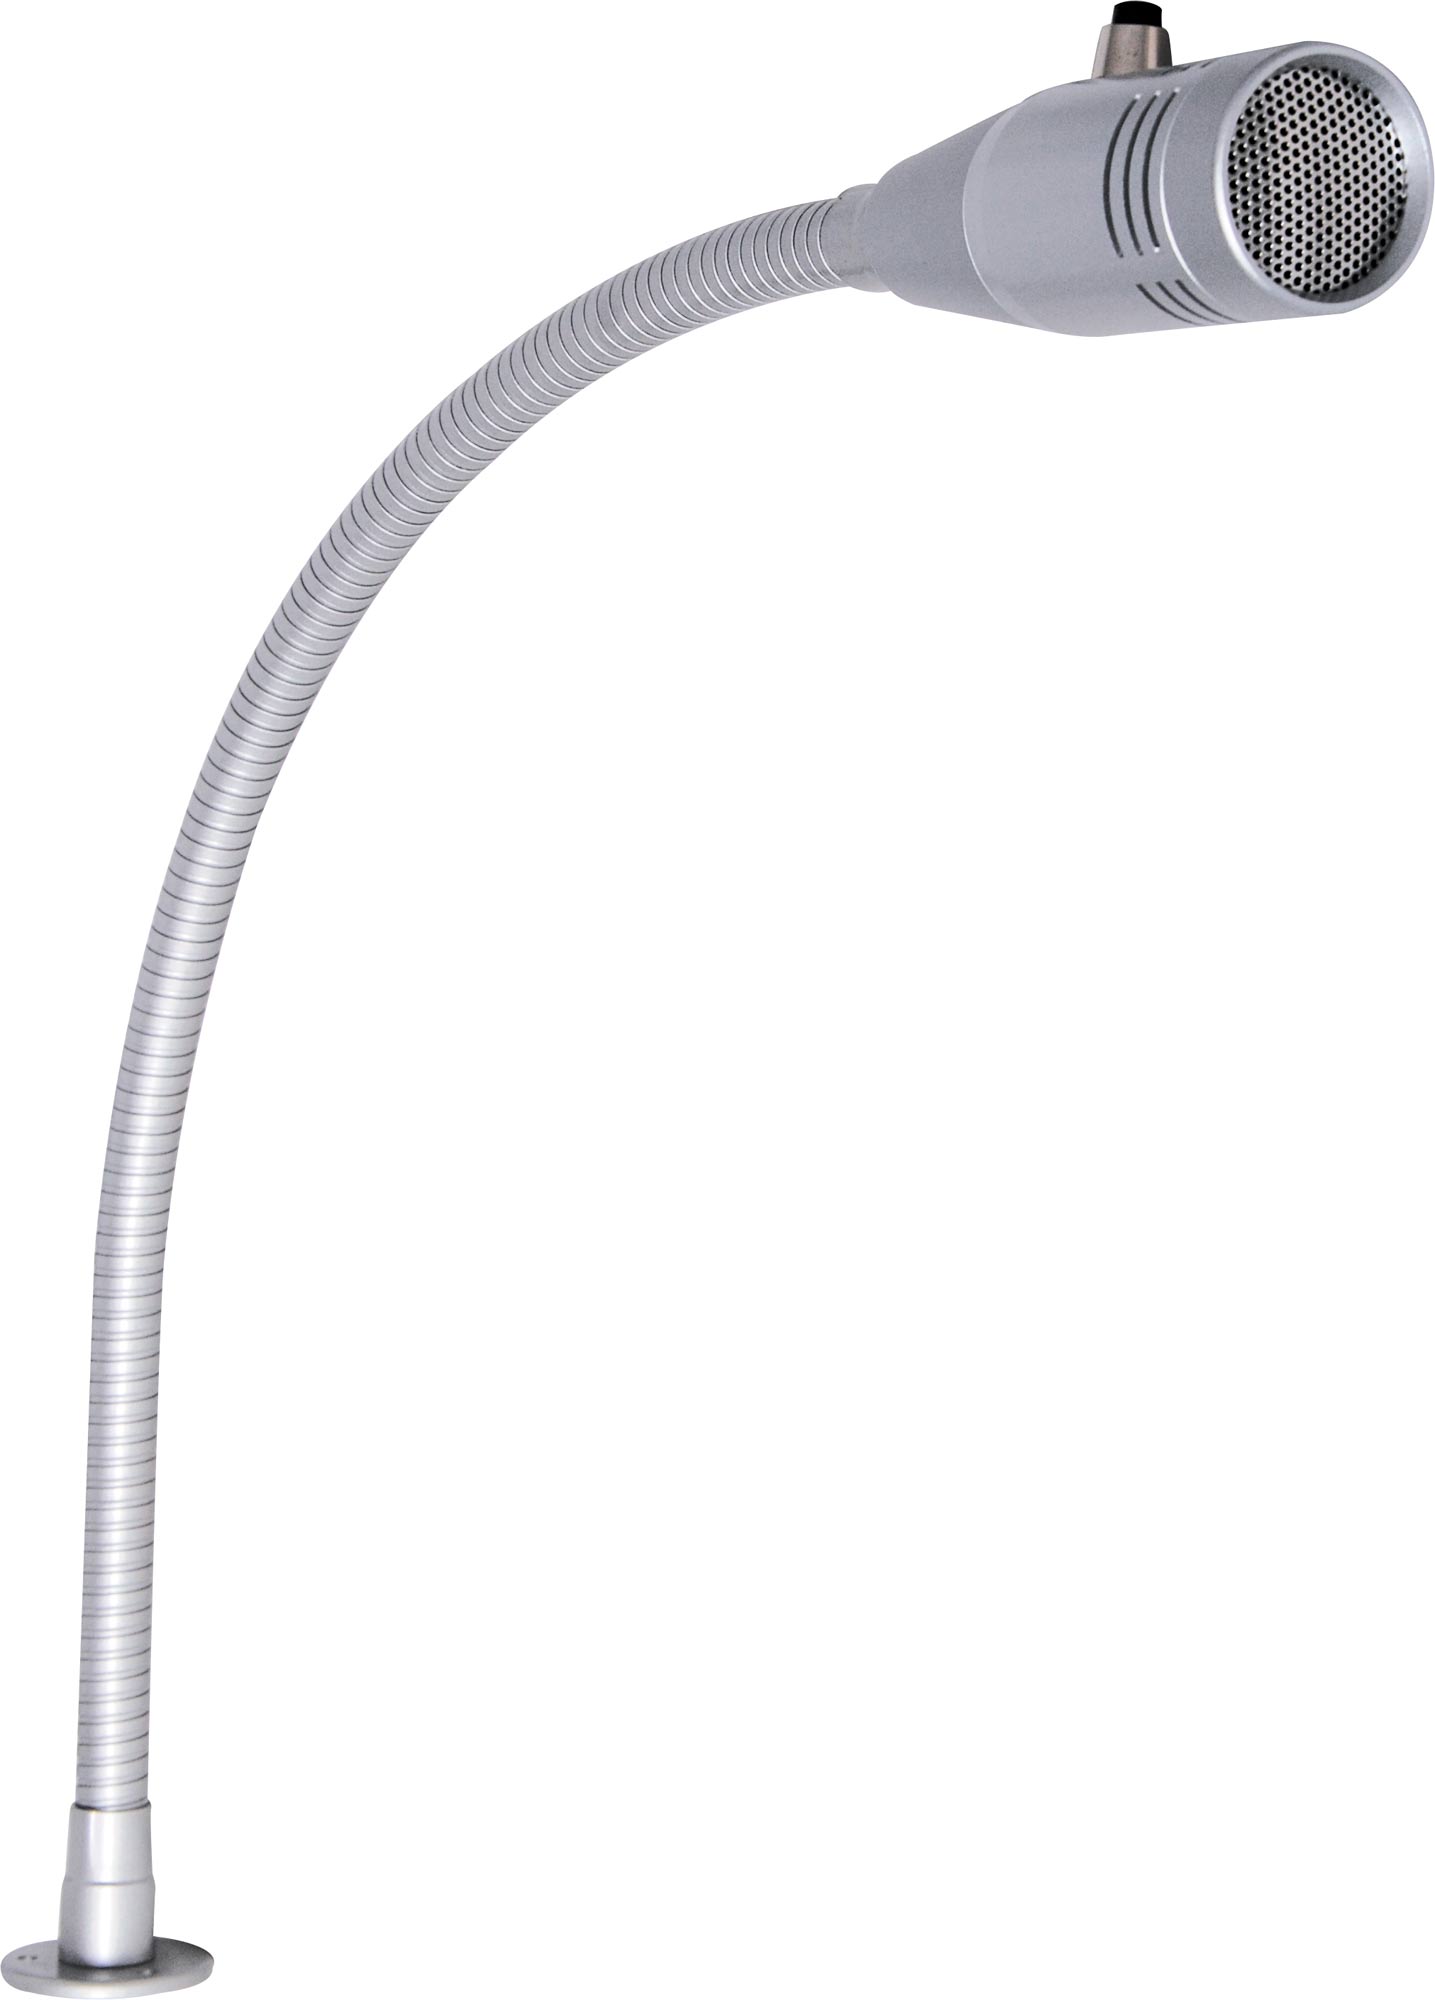 REDBACK SIVER 450MM GOOSENECK PAGING MICROPHONE METAL WITH SCREW BASE PTT INPUT SUITS SUPERMARKETS/ FAST FOOD/ RESTAURANTS